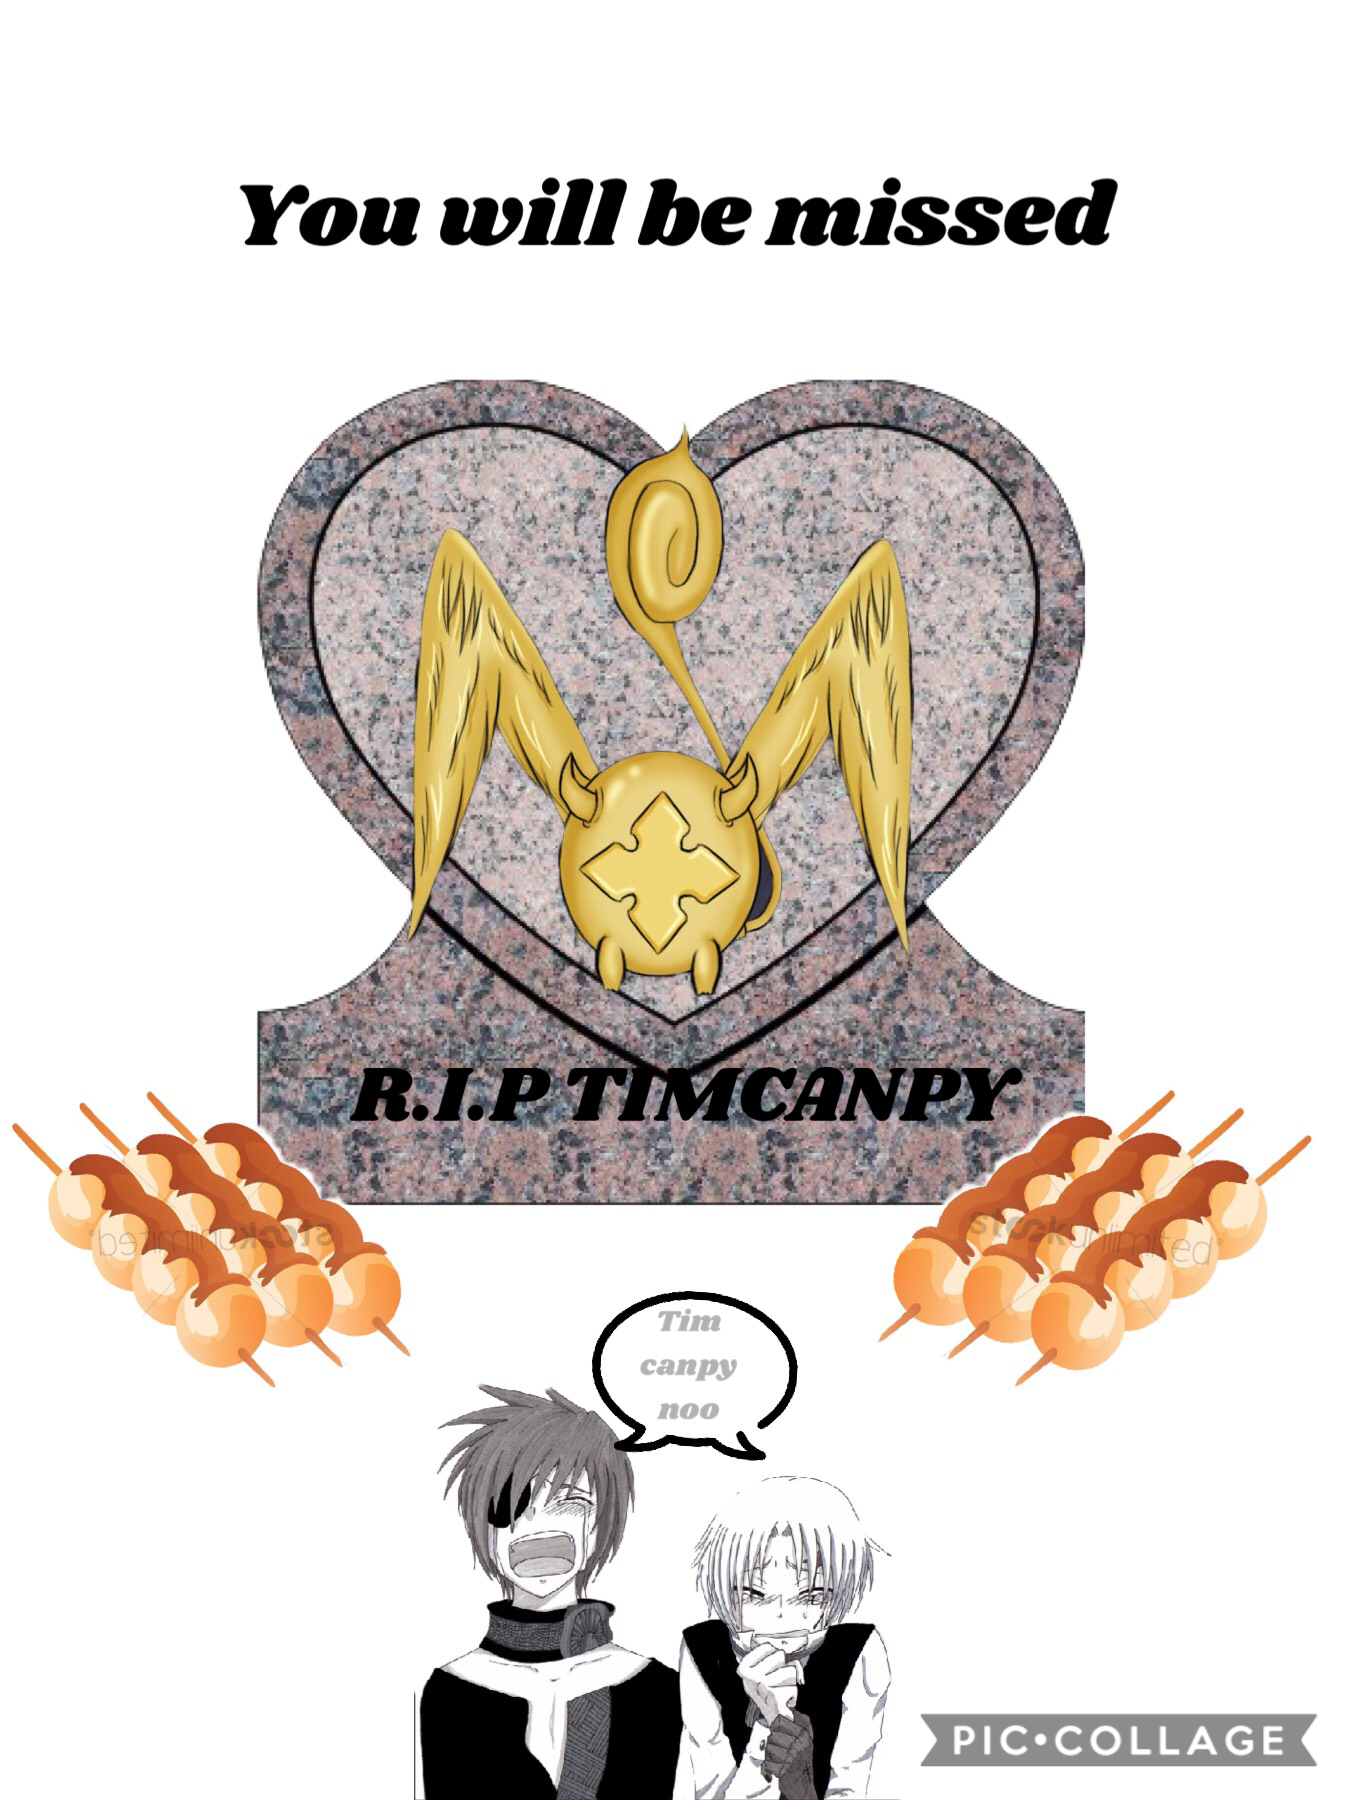 R.I.P TIMCANPY (TAP) 
TIMCANPY IS A BELOVED GOLEM IN THE MANGA AND ANIME SERIES D.GRAY-MAN